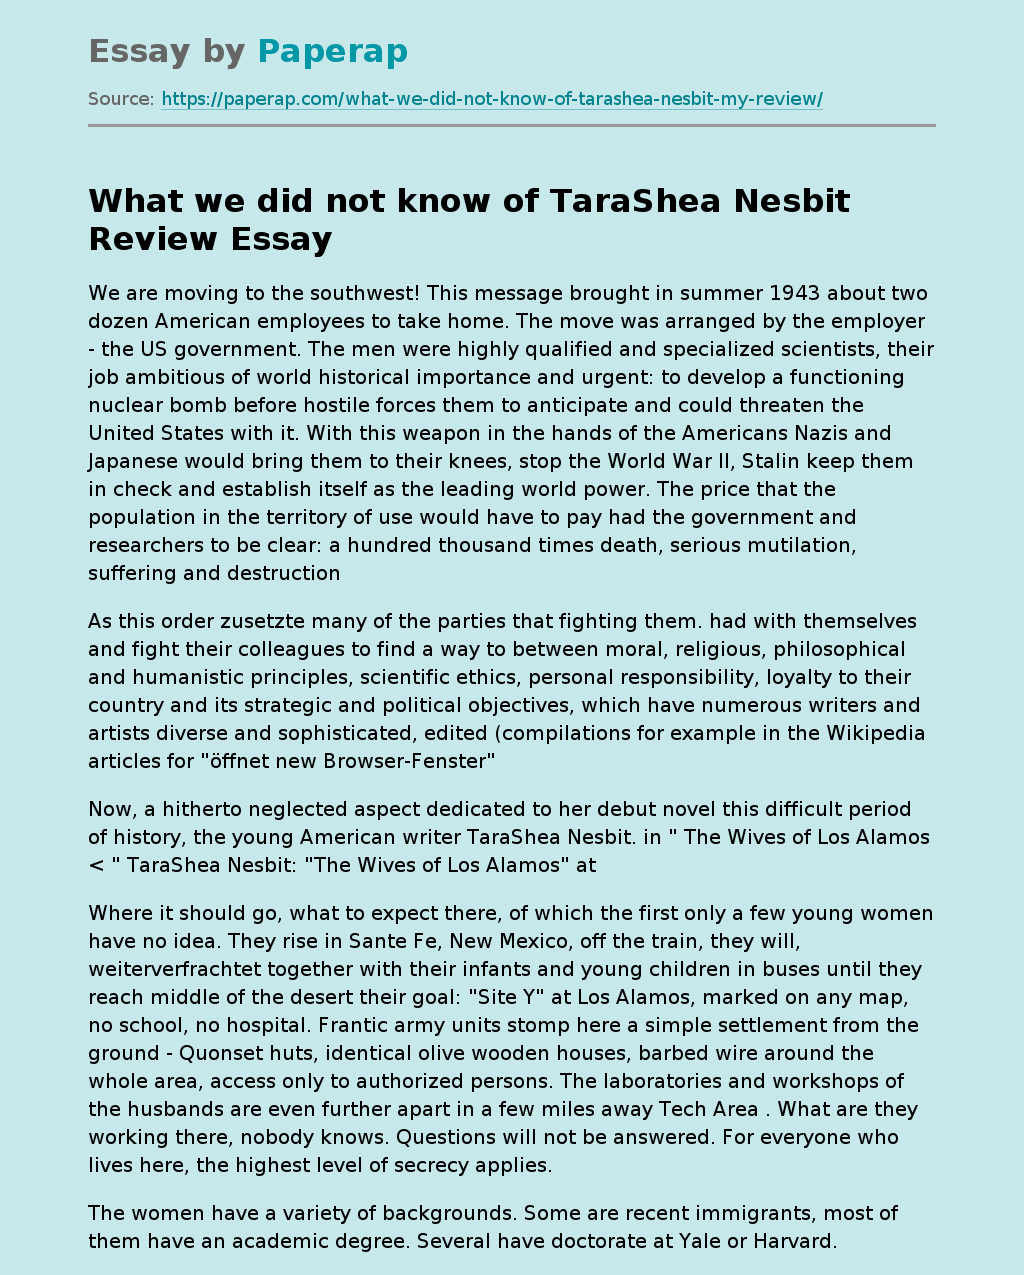 What we did not know of TaraShea Nesbit Review